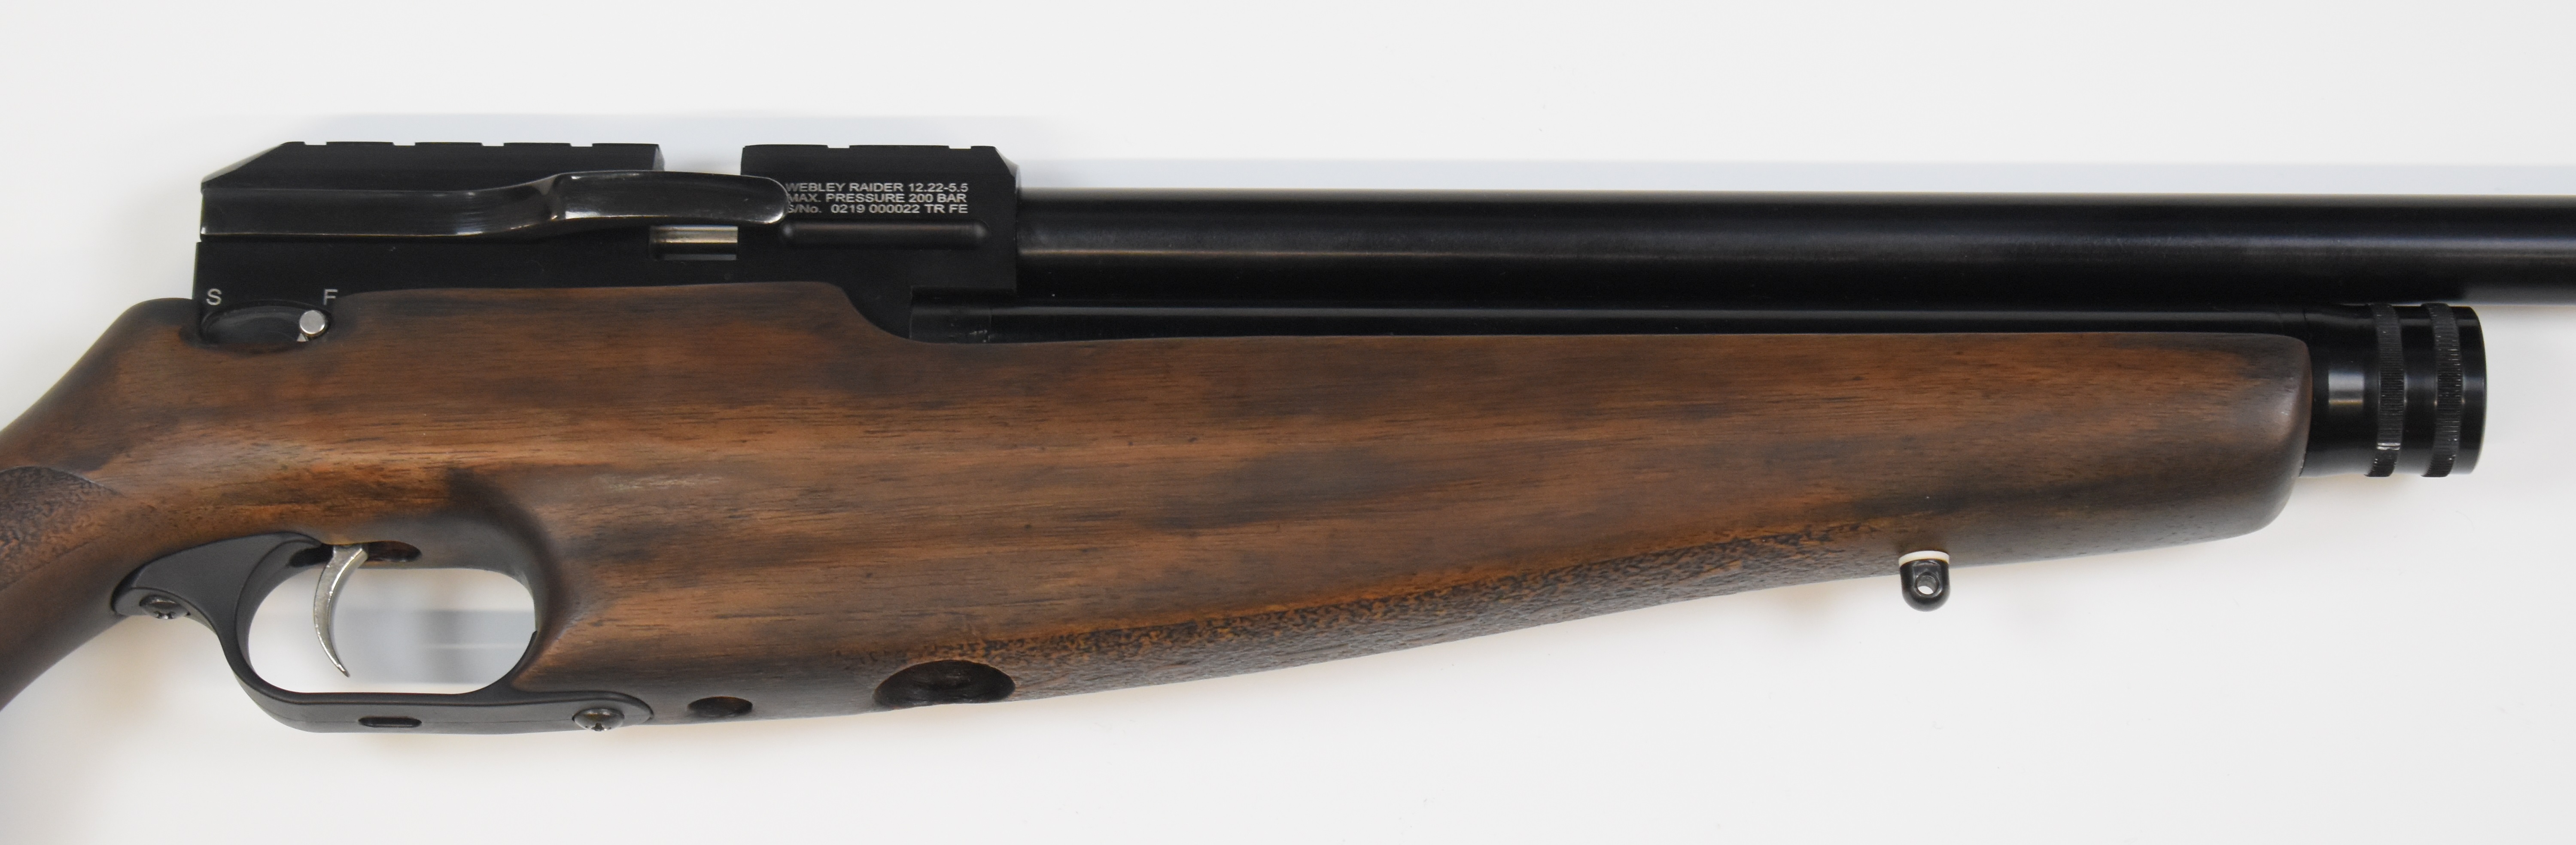 Webley Raider 12 .22 PCP air rifle with aluminium carbine cylinder, textured semi-pistol grip and - Image 4 of 11